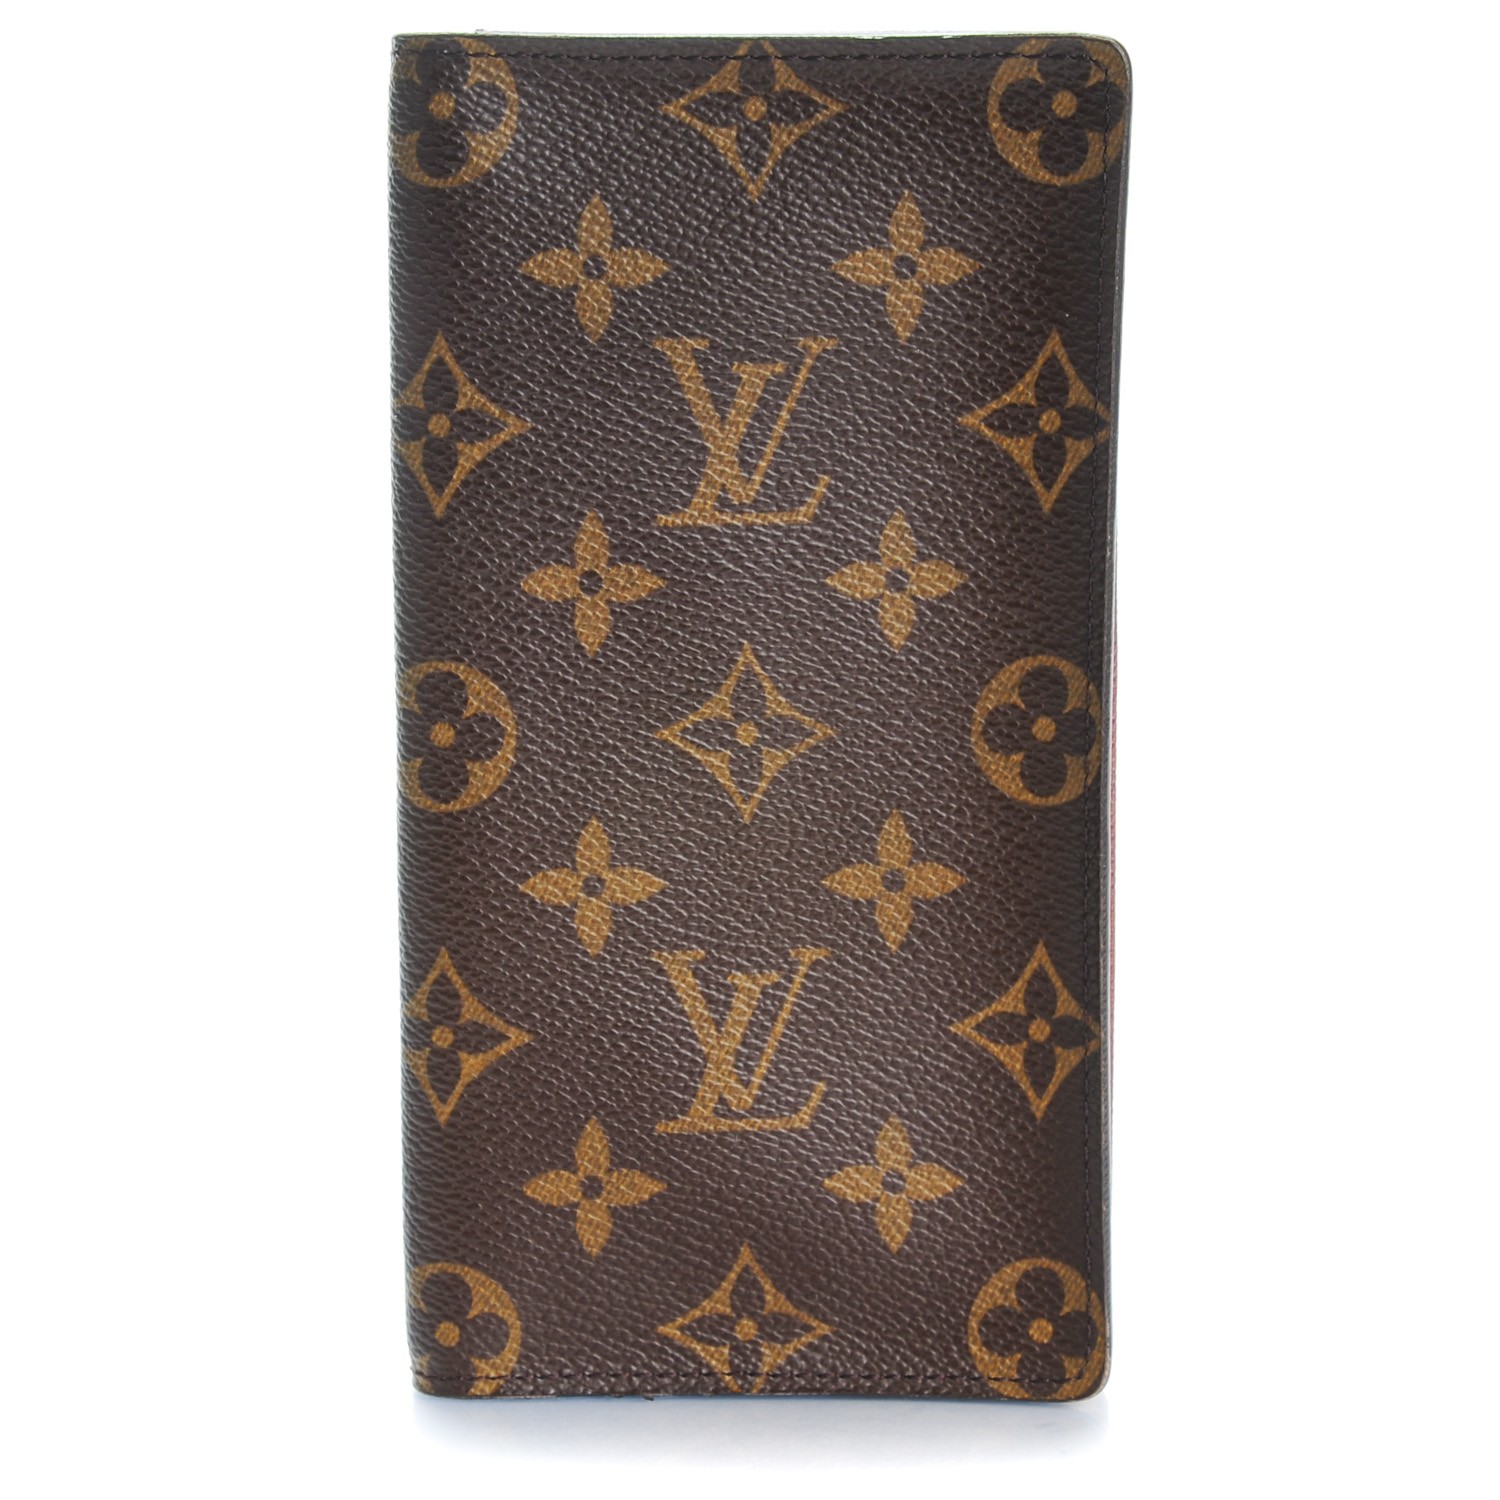 Louis V PORTE CARTES DOUBLE. Double card holder., in Swindon, Wiltshire